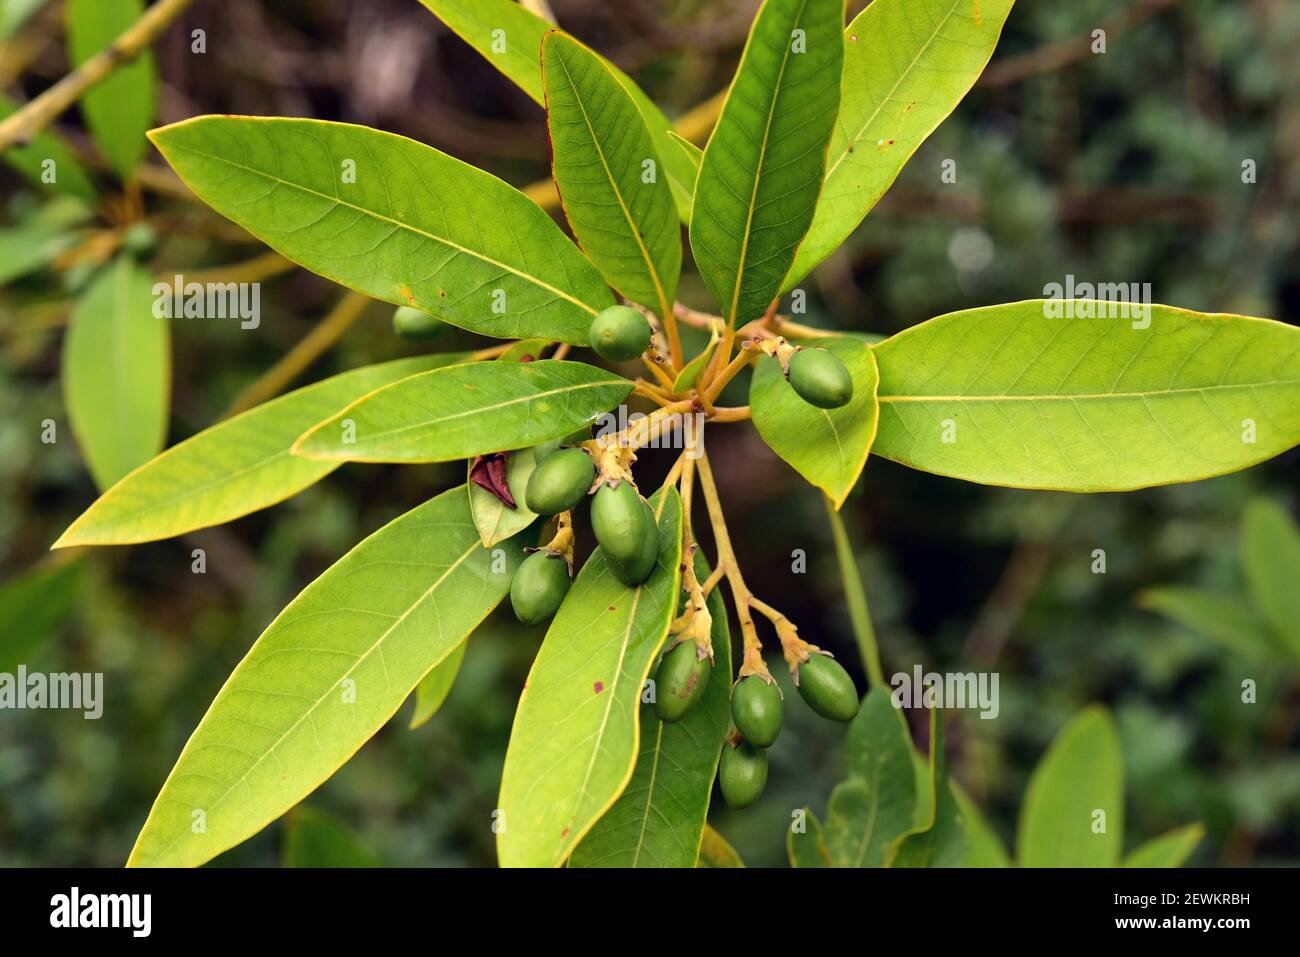 Viñatigo (Persea indica) is a evergreen tree endemic to Macaronesia (Canary Islands, Madeira and Azores). Immature fruits and leaves detail. Stock Photo